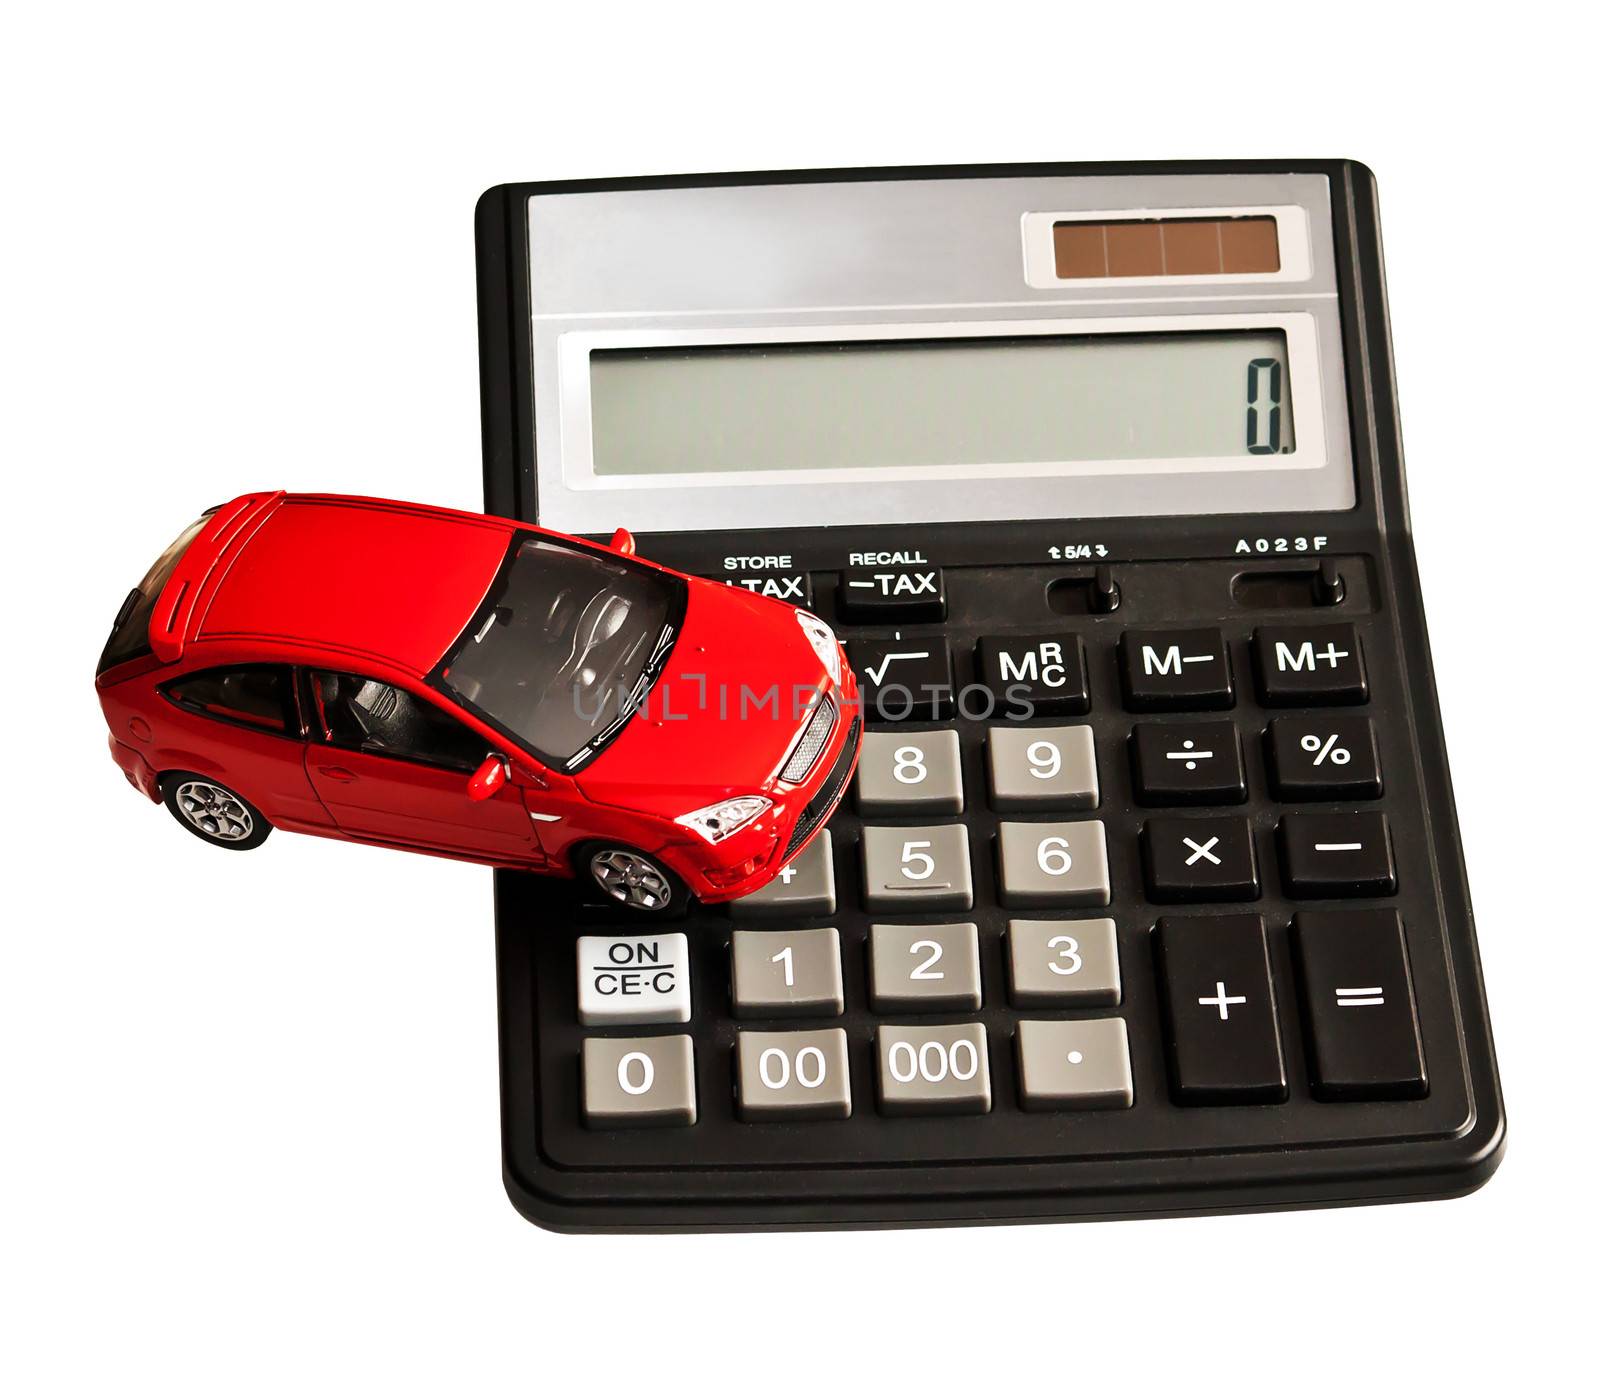 Toy car and calculator. Concept for buying, renting, insurance, fuel, service and repair costs
